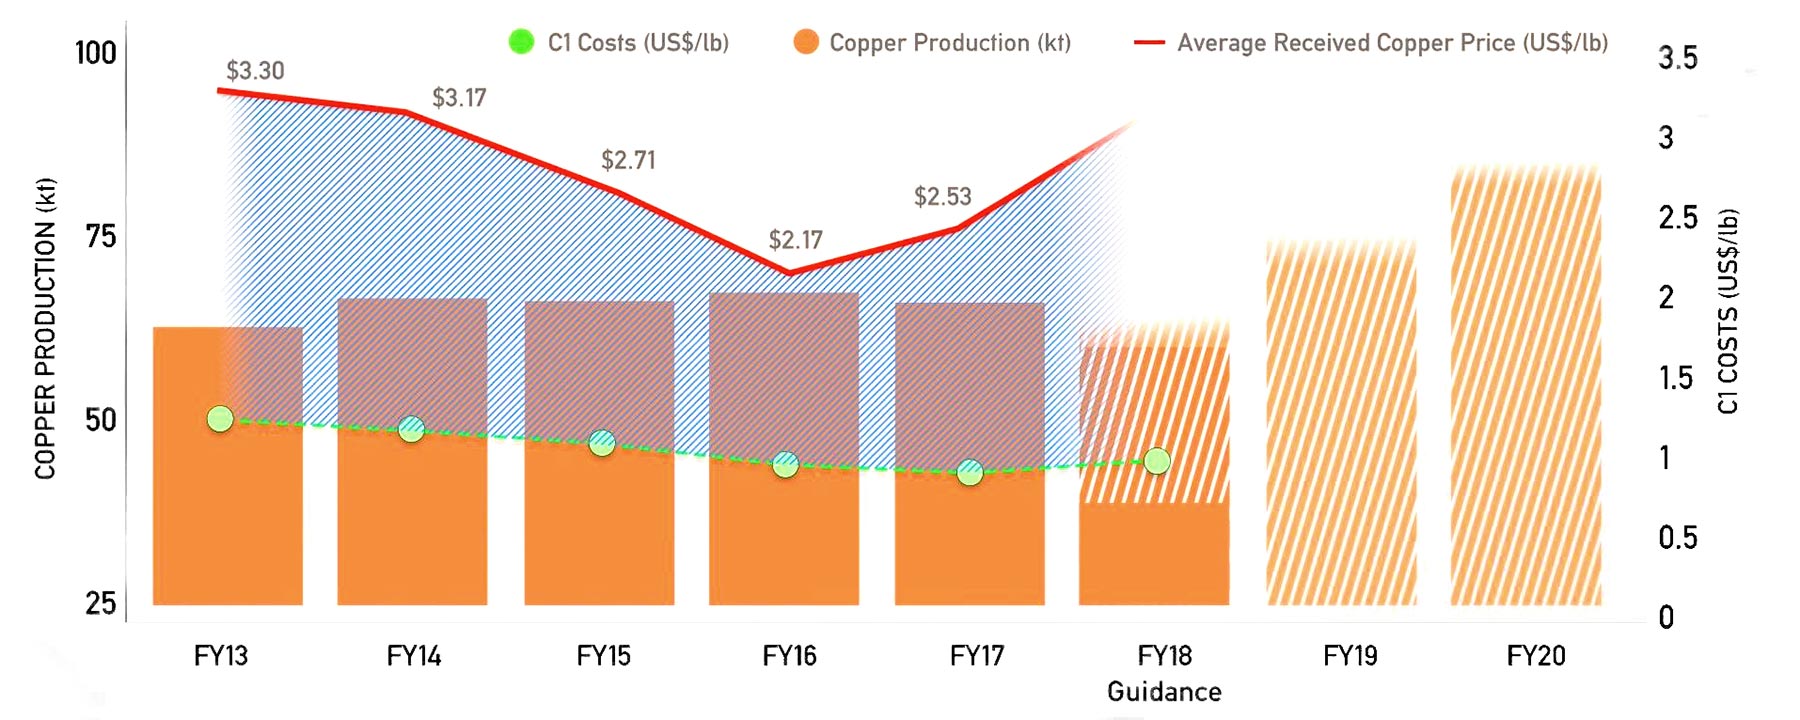 Debt-free from FY17 with rising production profile in a rising copper market